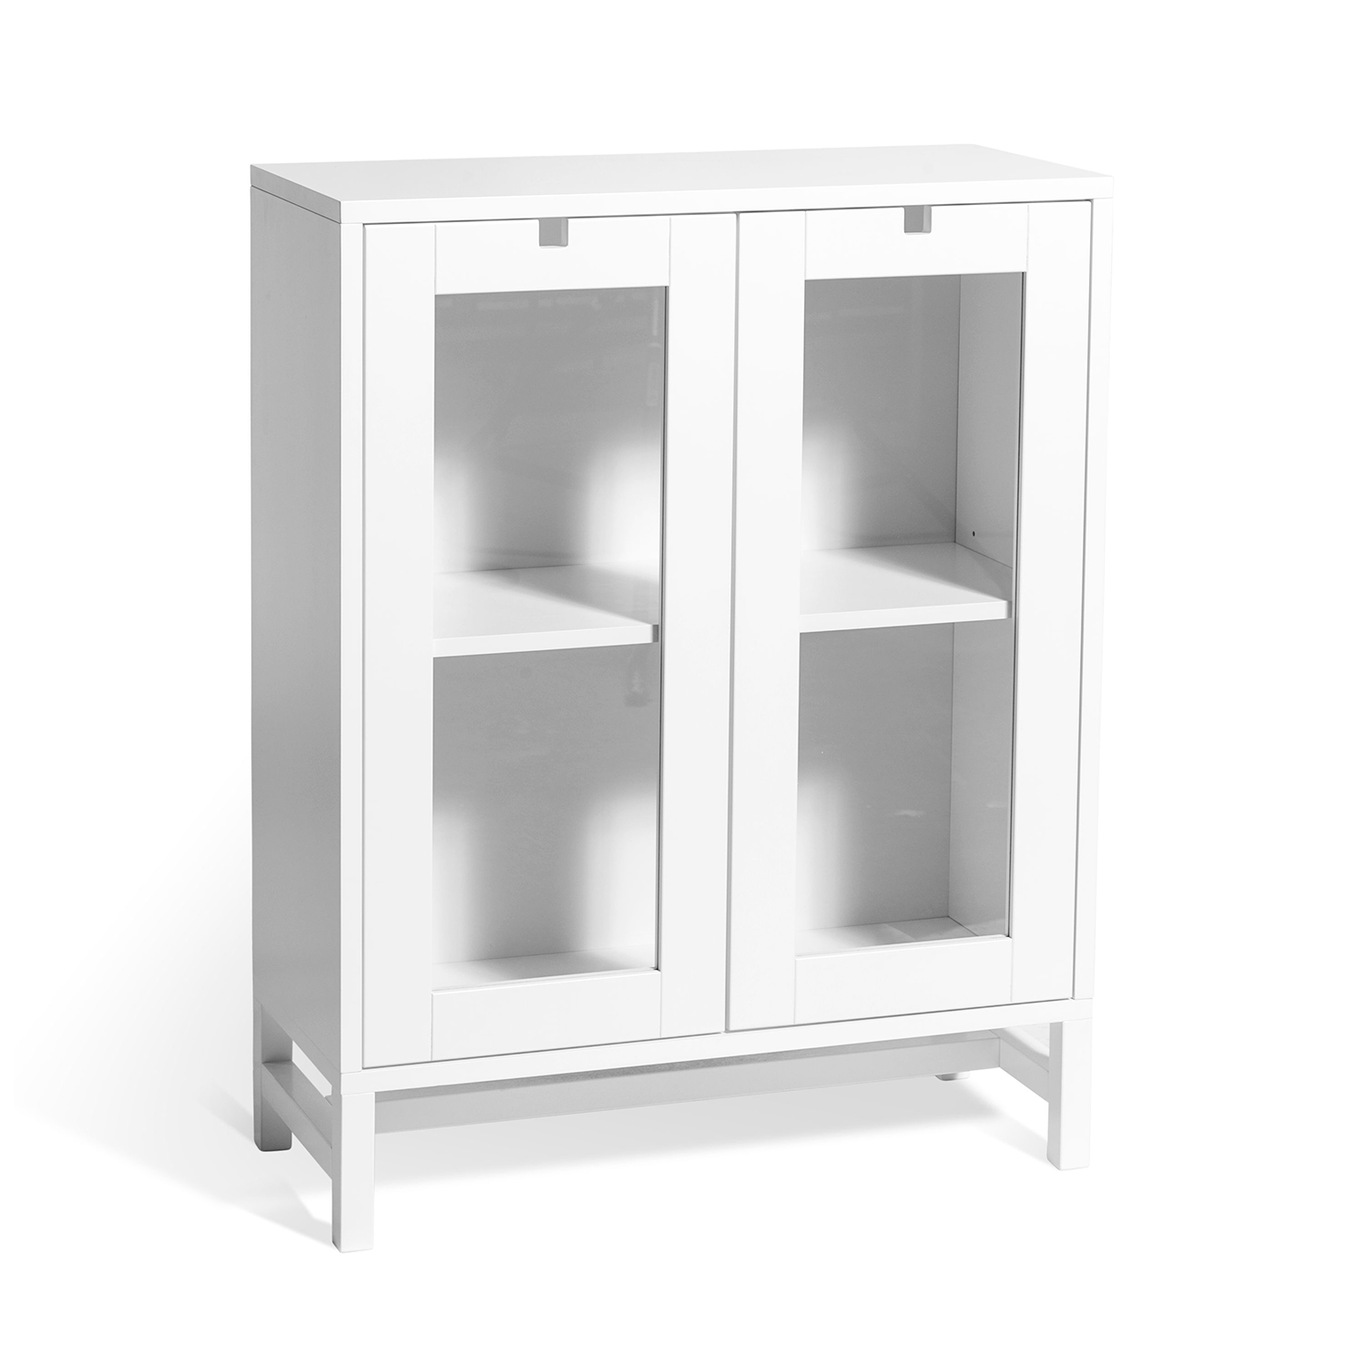 Falsterbo Cabinet Glass Doors 90 cm, White Lacquer